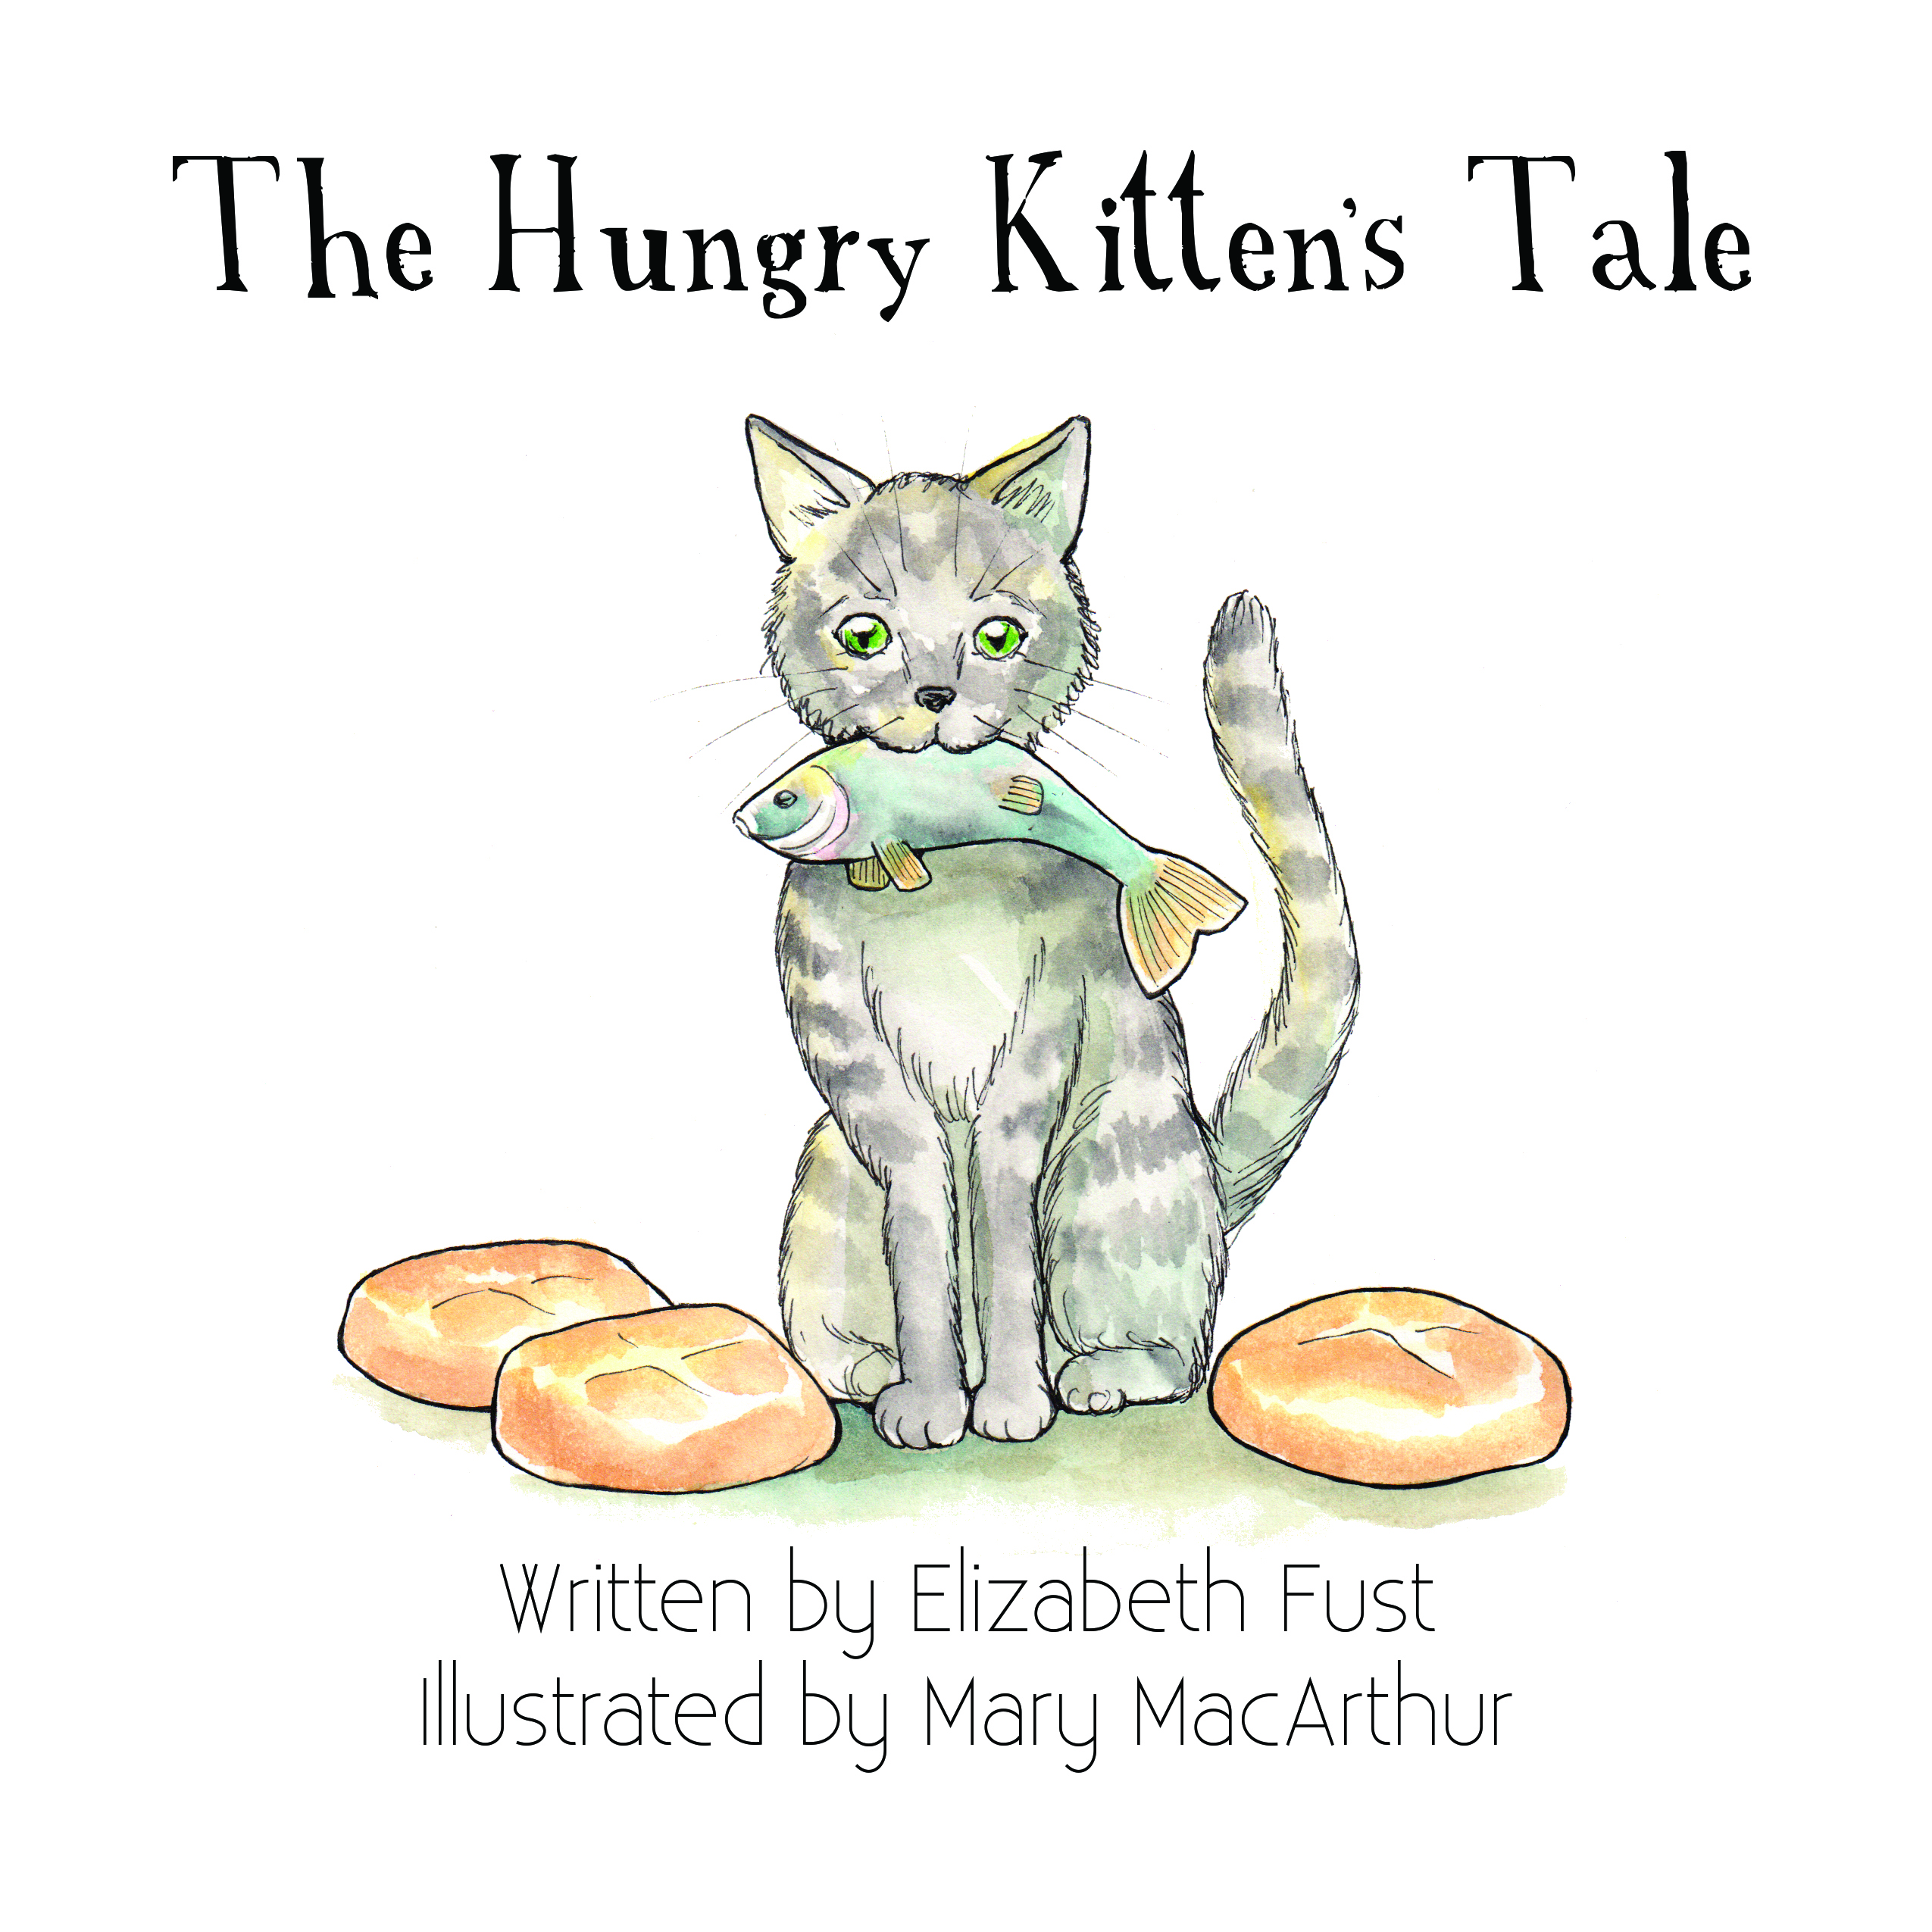 The Hungry Kitten's Tale main image